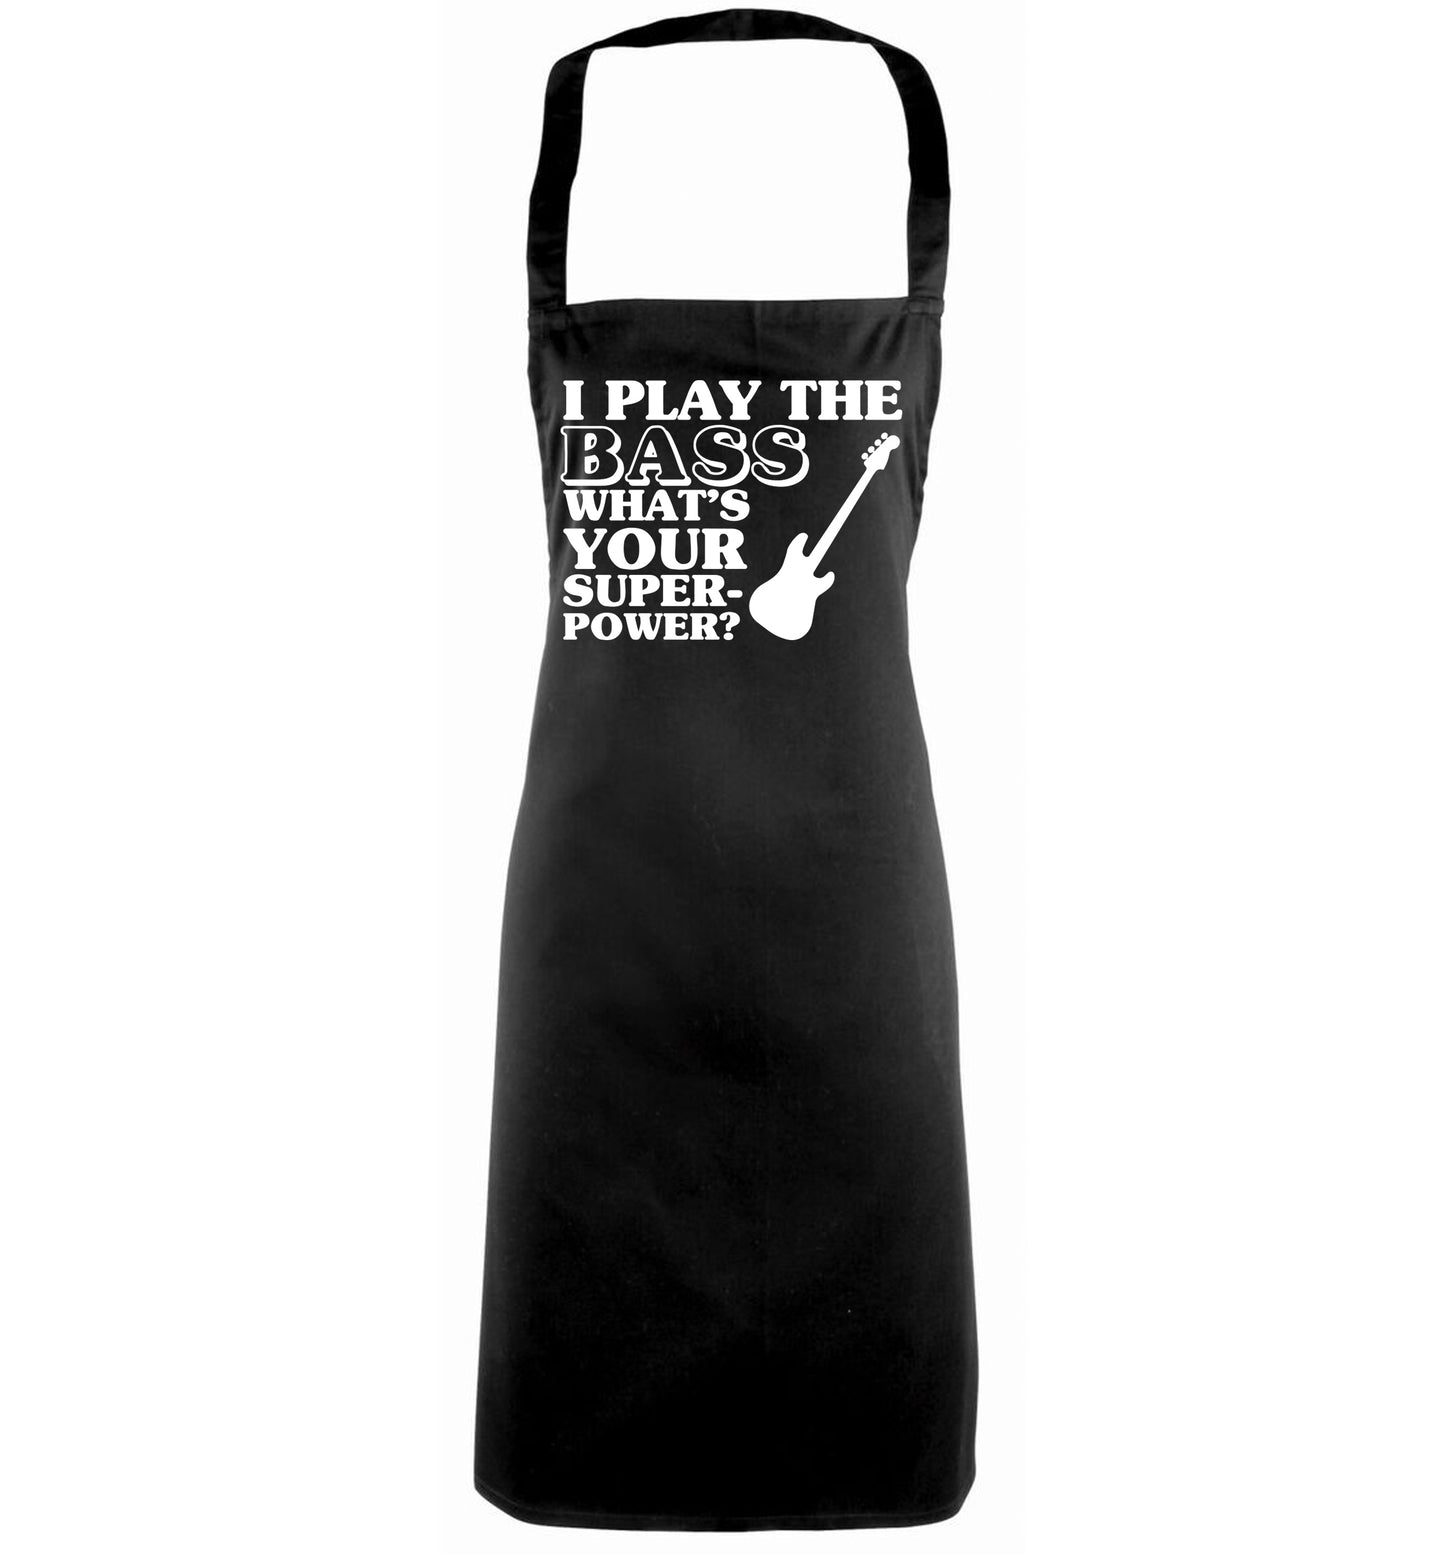 I play the bass what's your superpower? black apron